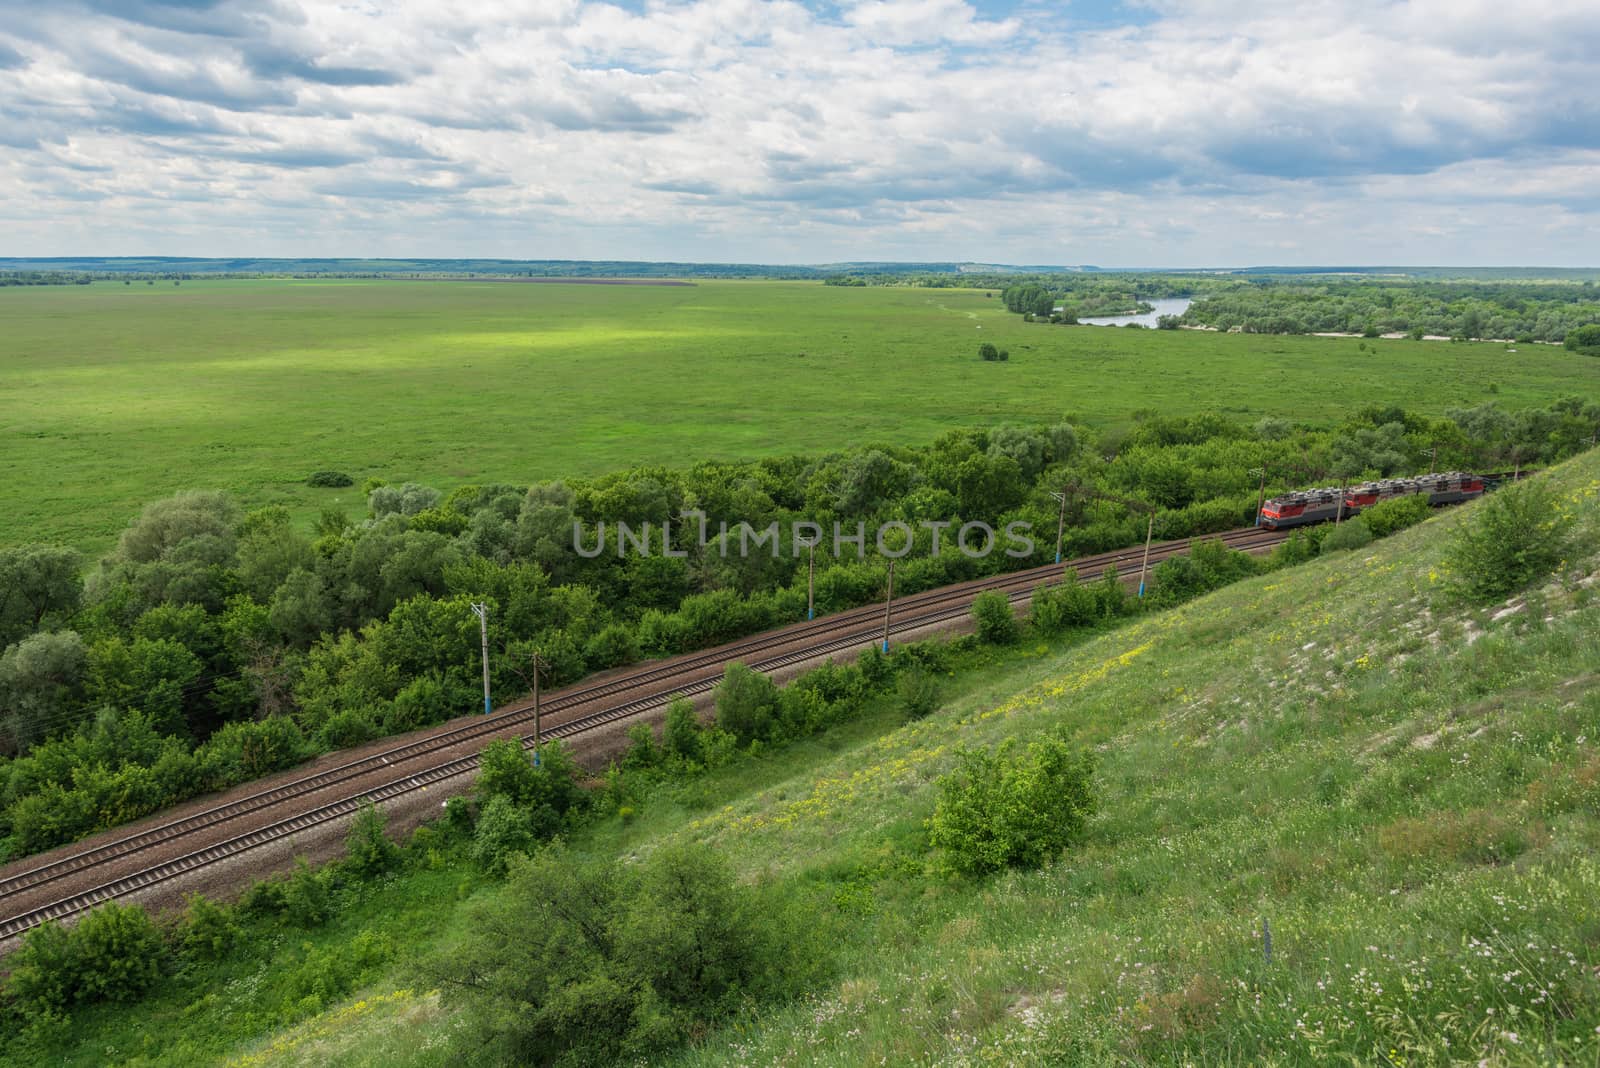 Freight train with locomotives passing by rail in Russia, along the typical Russian landscape, top view.